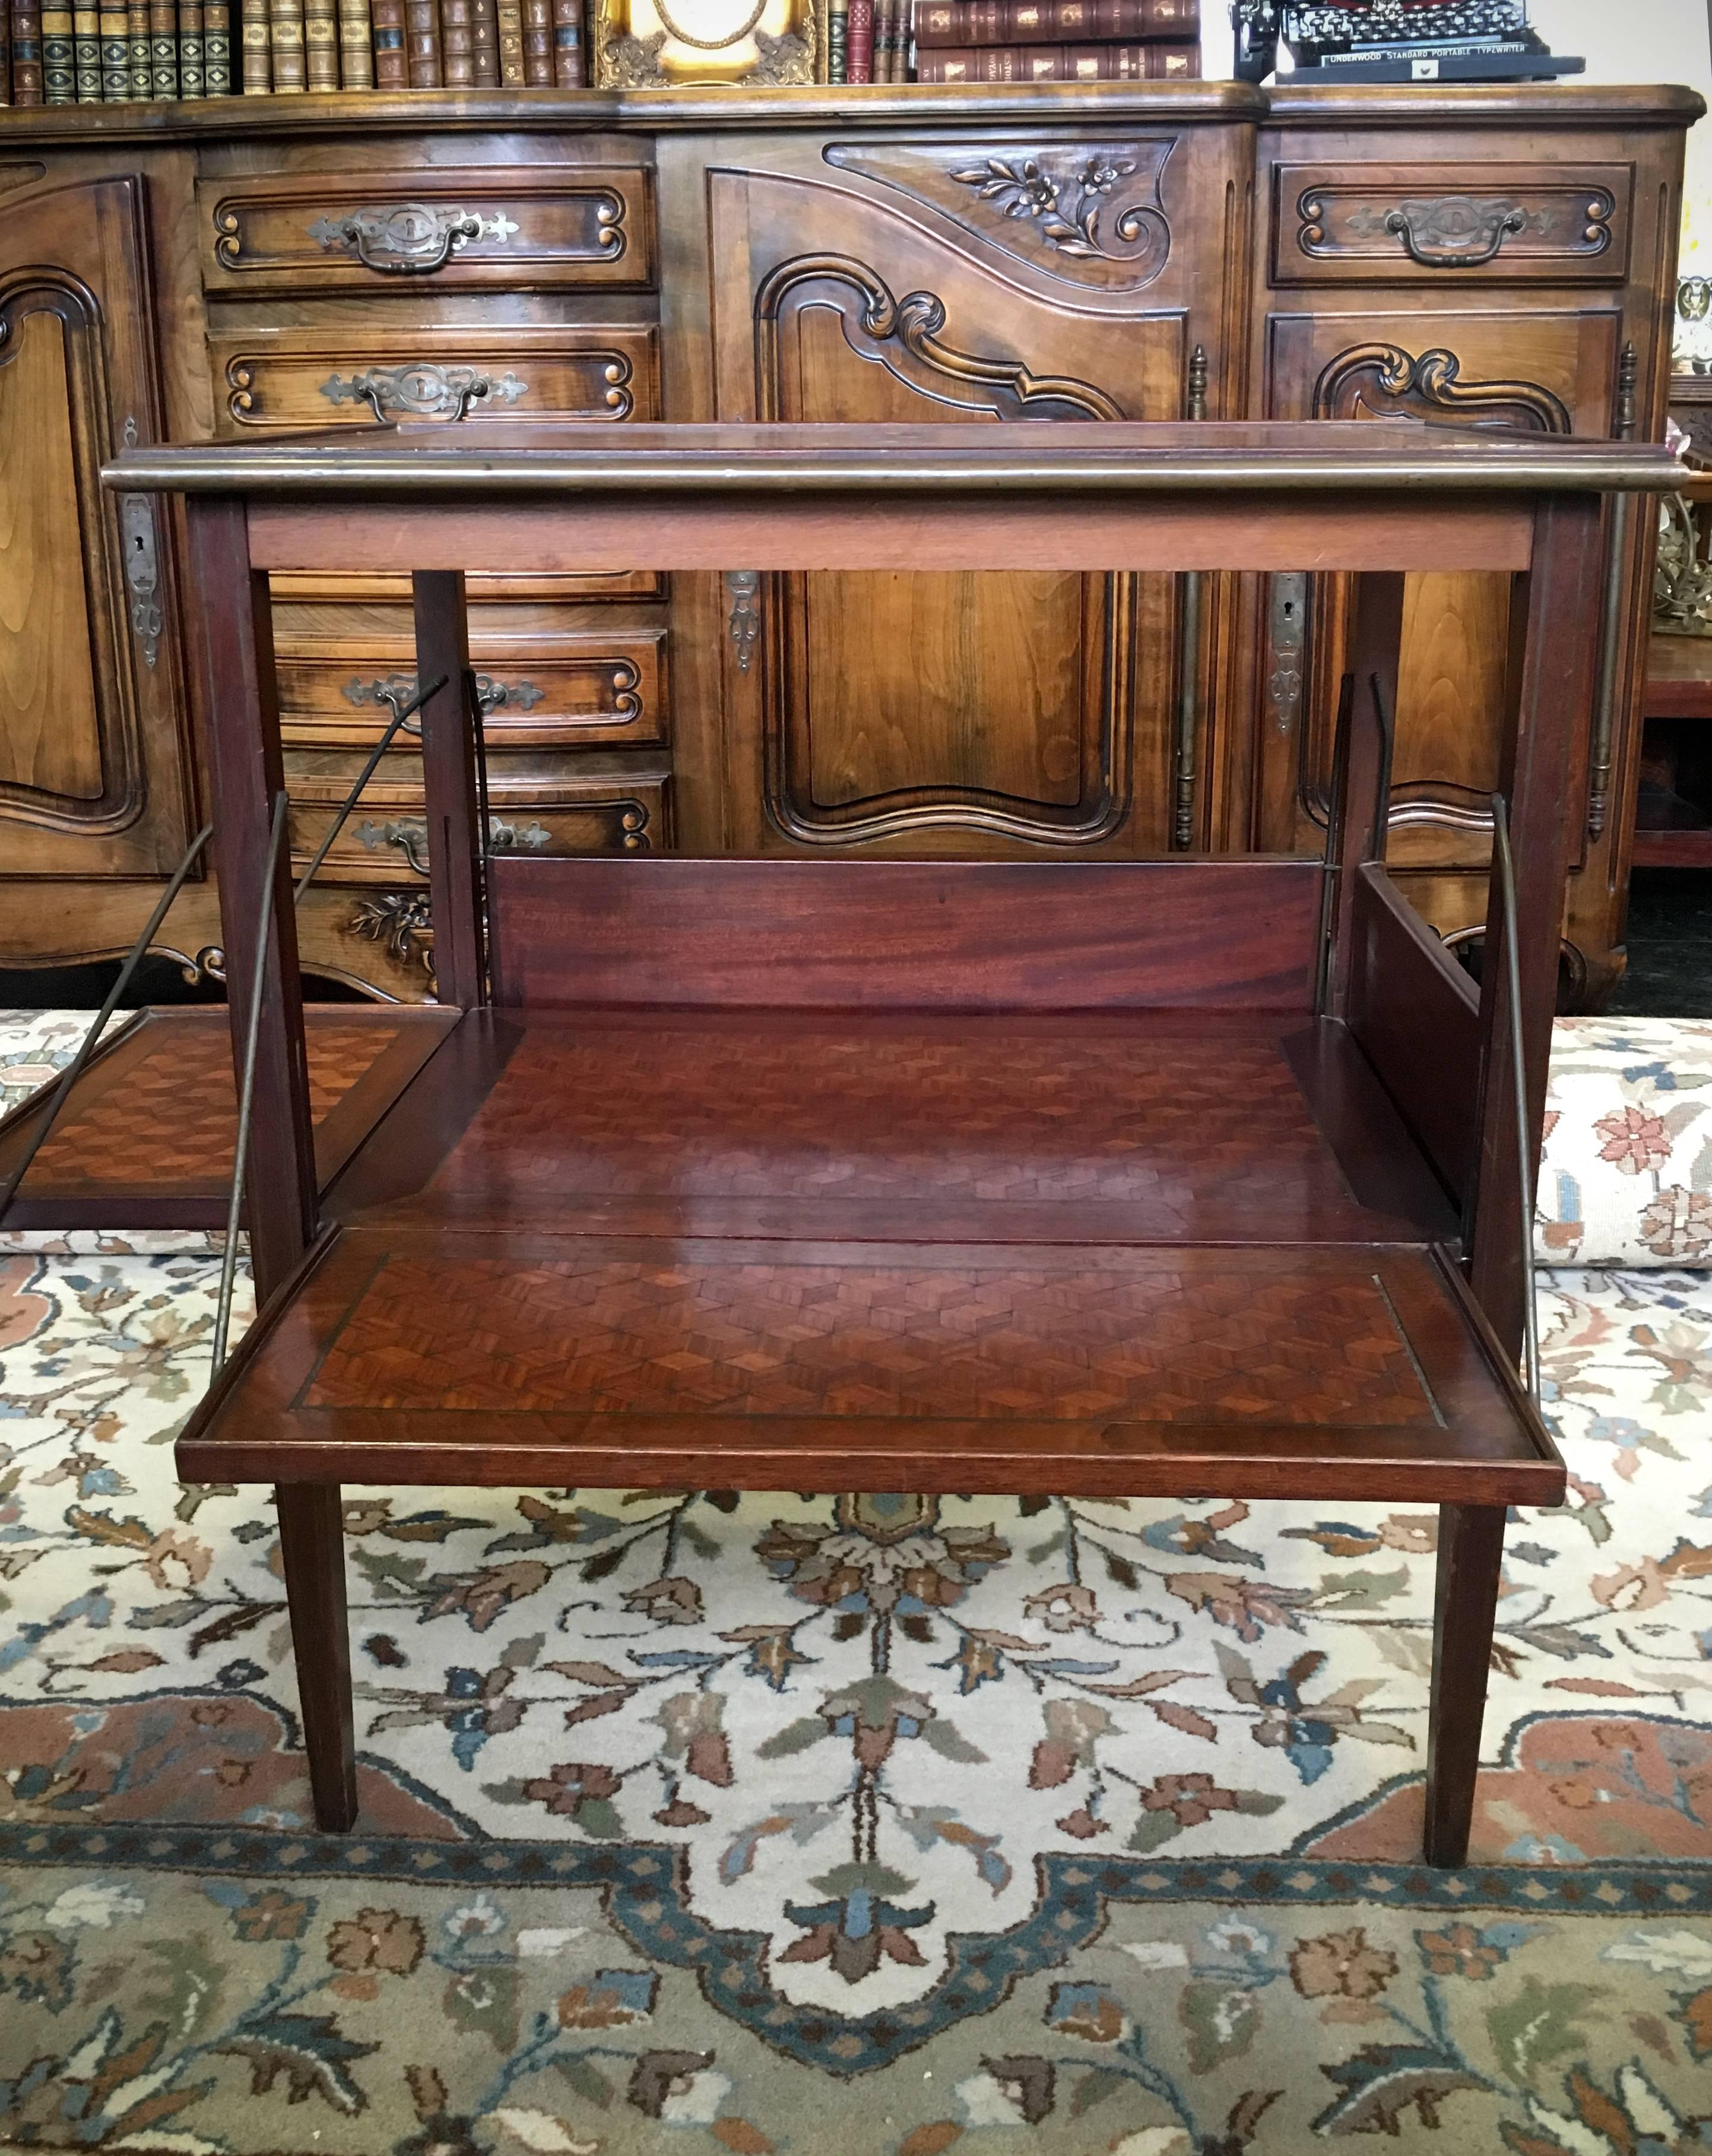 19th century mahogany marquetry serving table with four folding panels.
France, circa 1890.